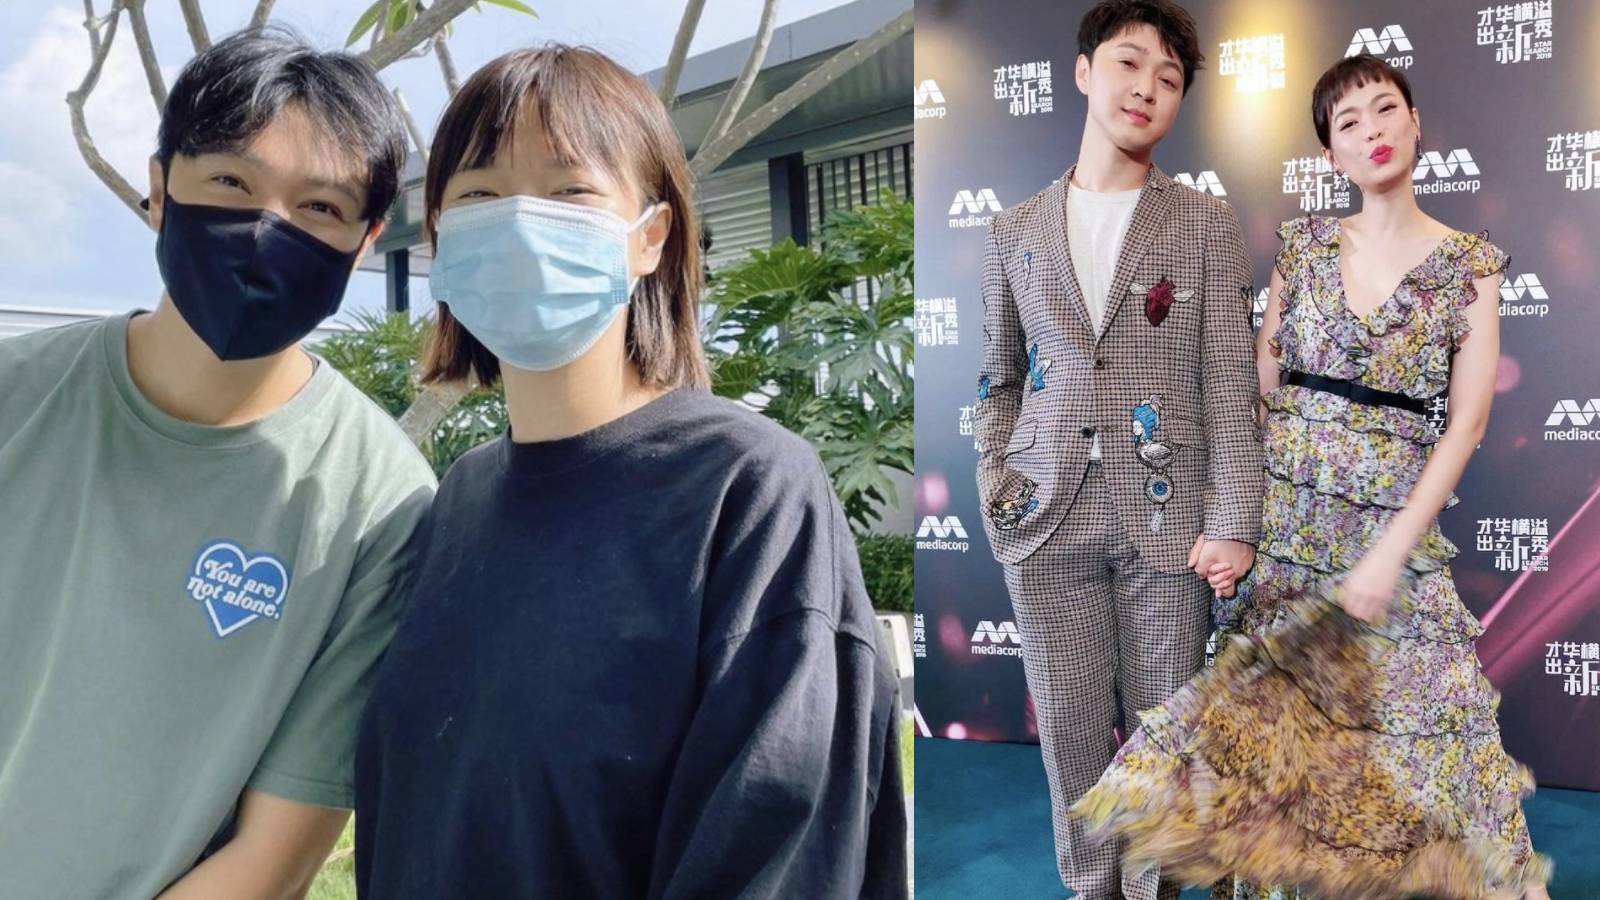 Felicia Chin And Jeffrey Xu Praised For Being “Incredibly Nice” After This Chance Encounter